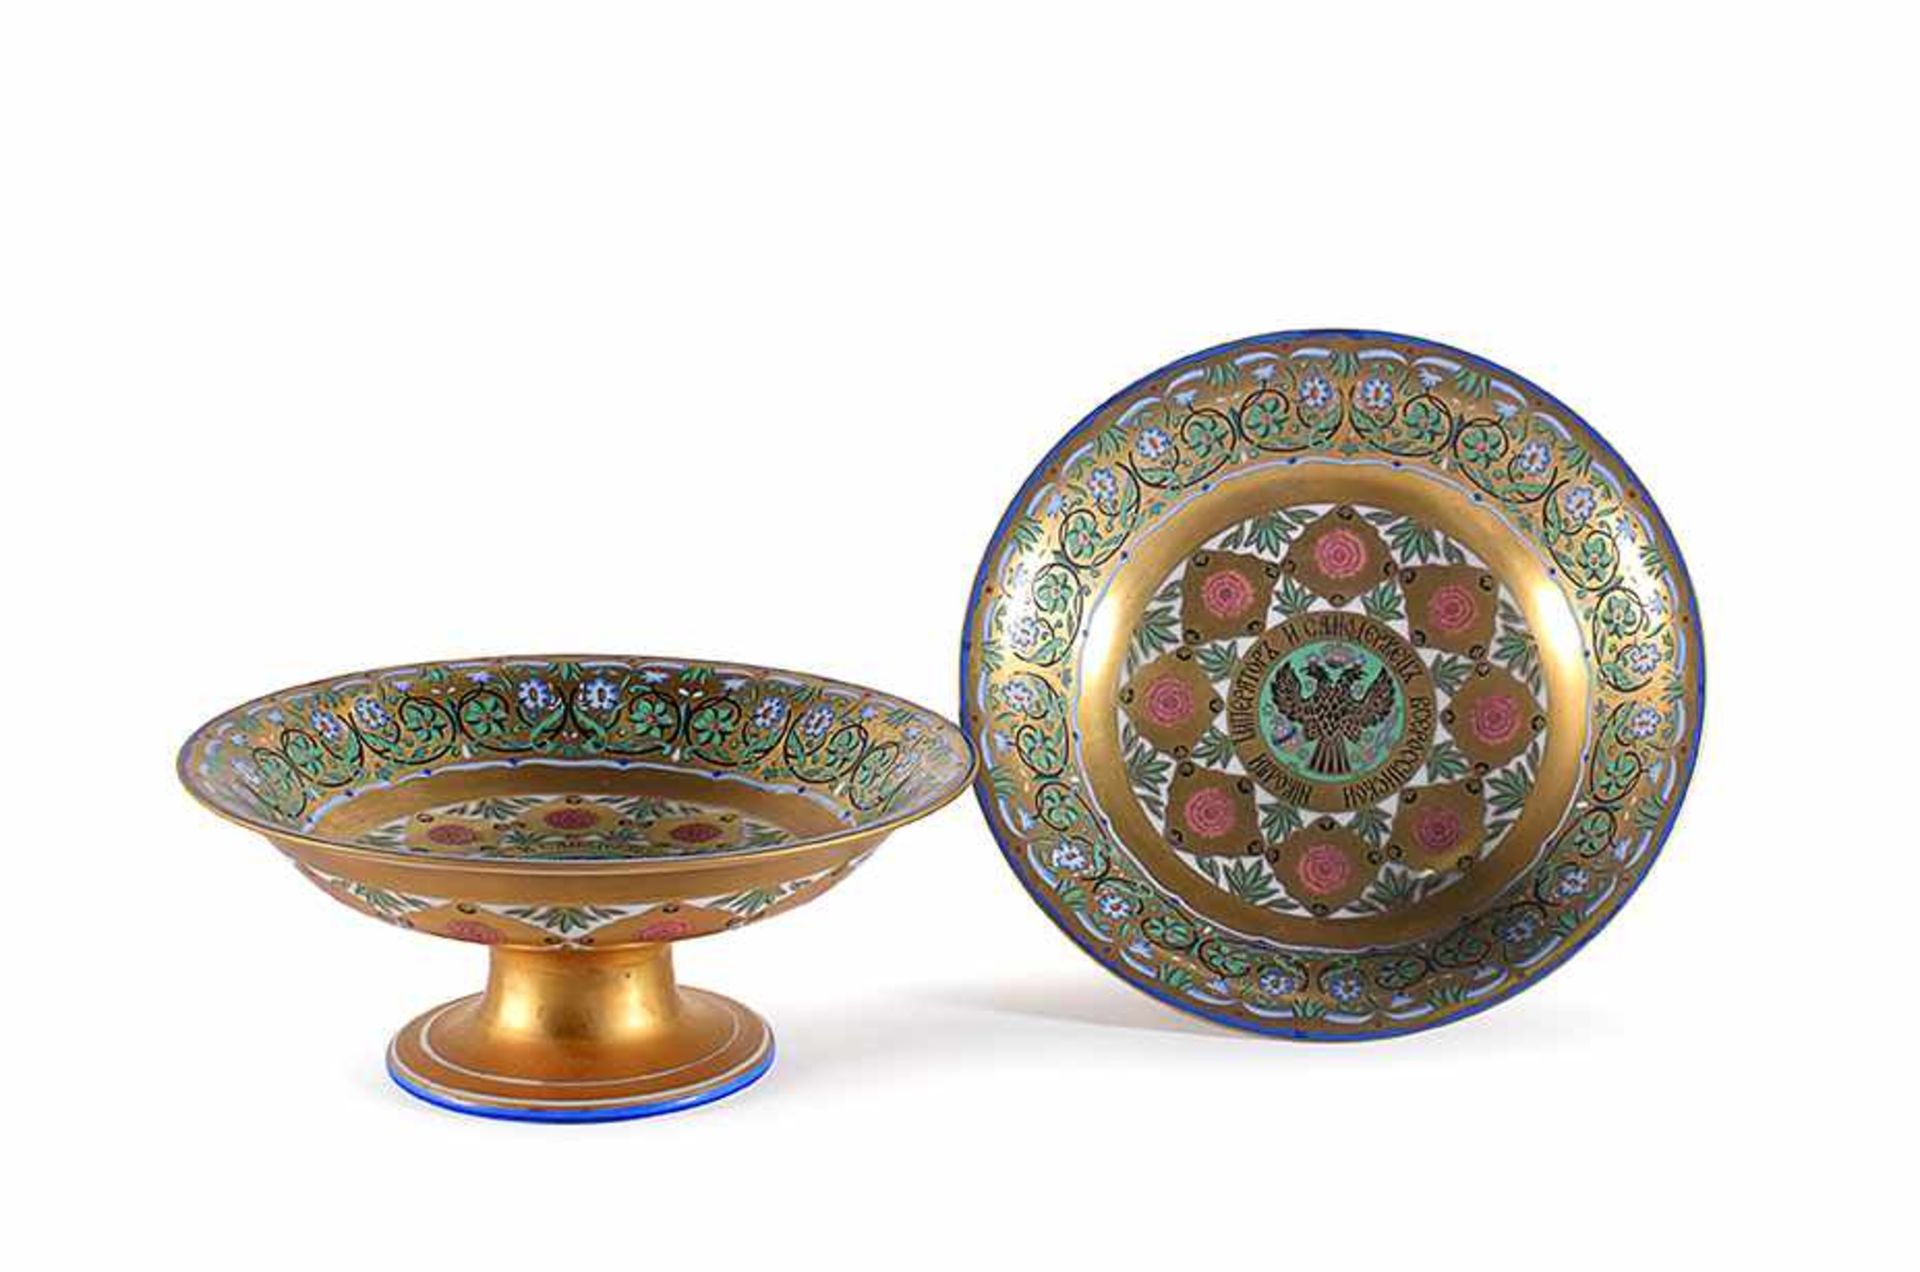 A pair of russian gilt and polychrome porcelain stands late 19th-early 20th century, 9,5by22cm.